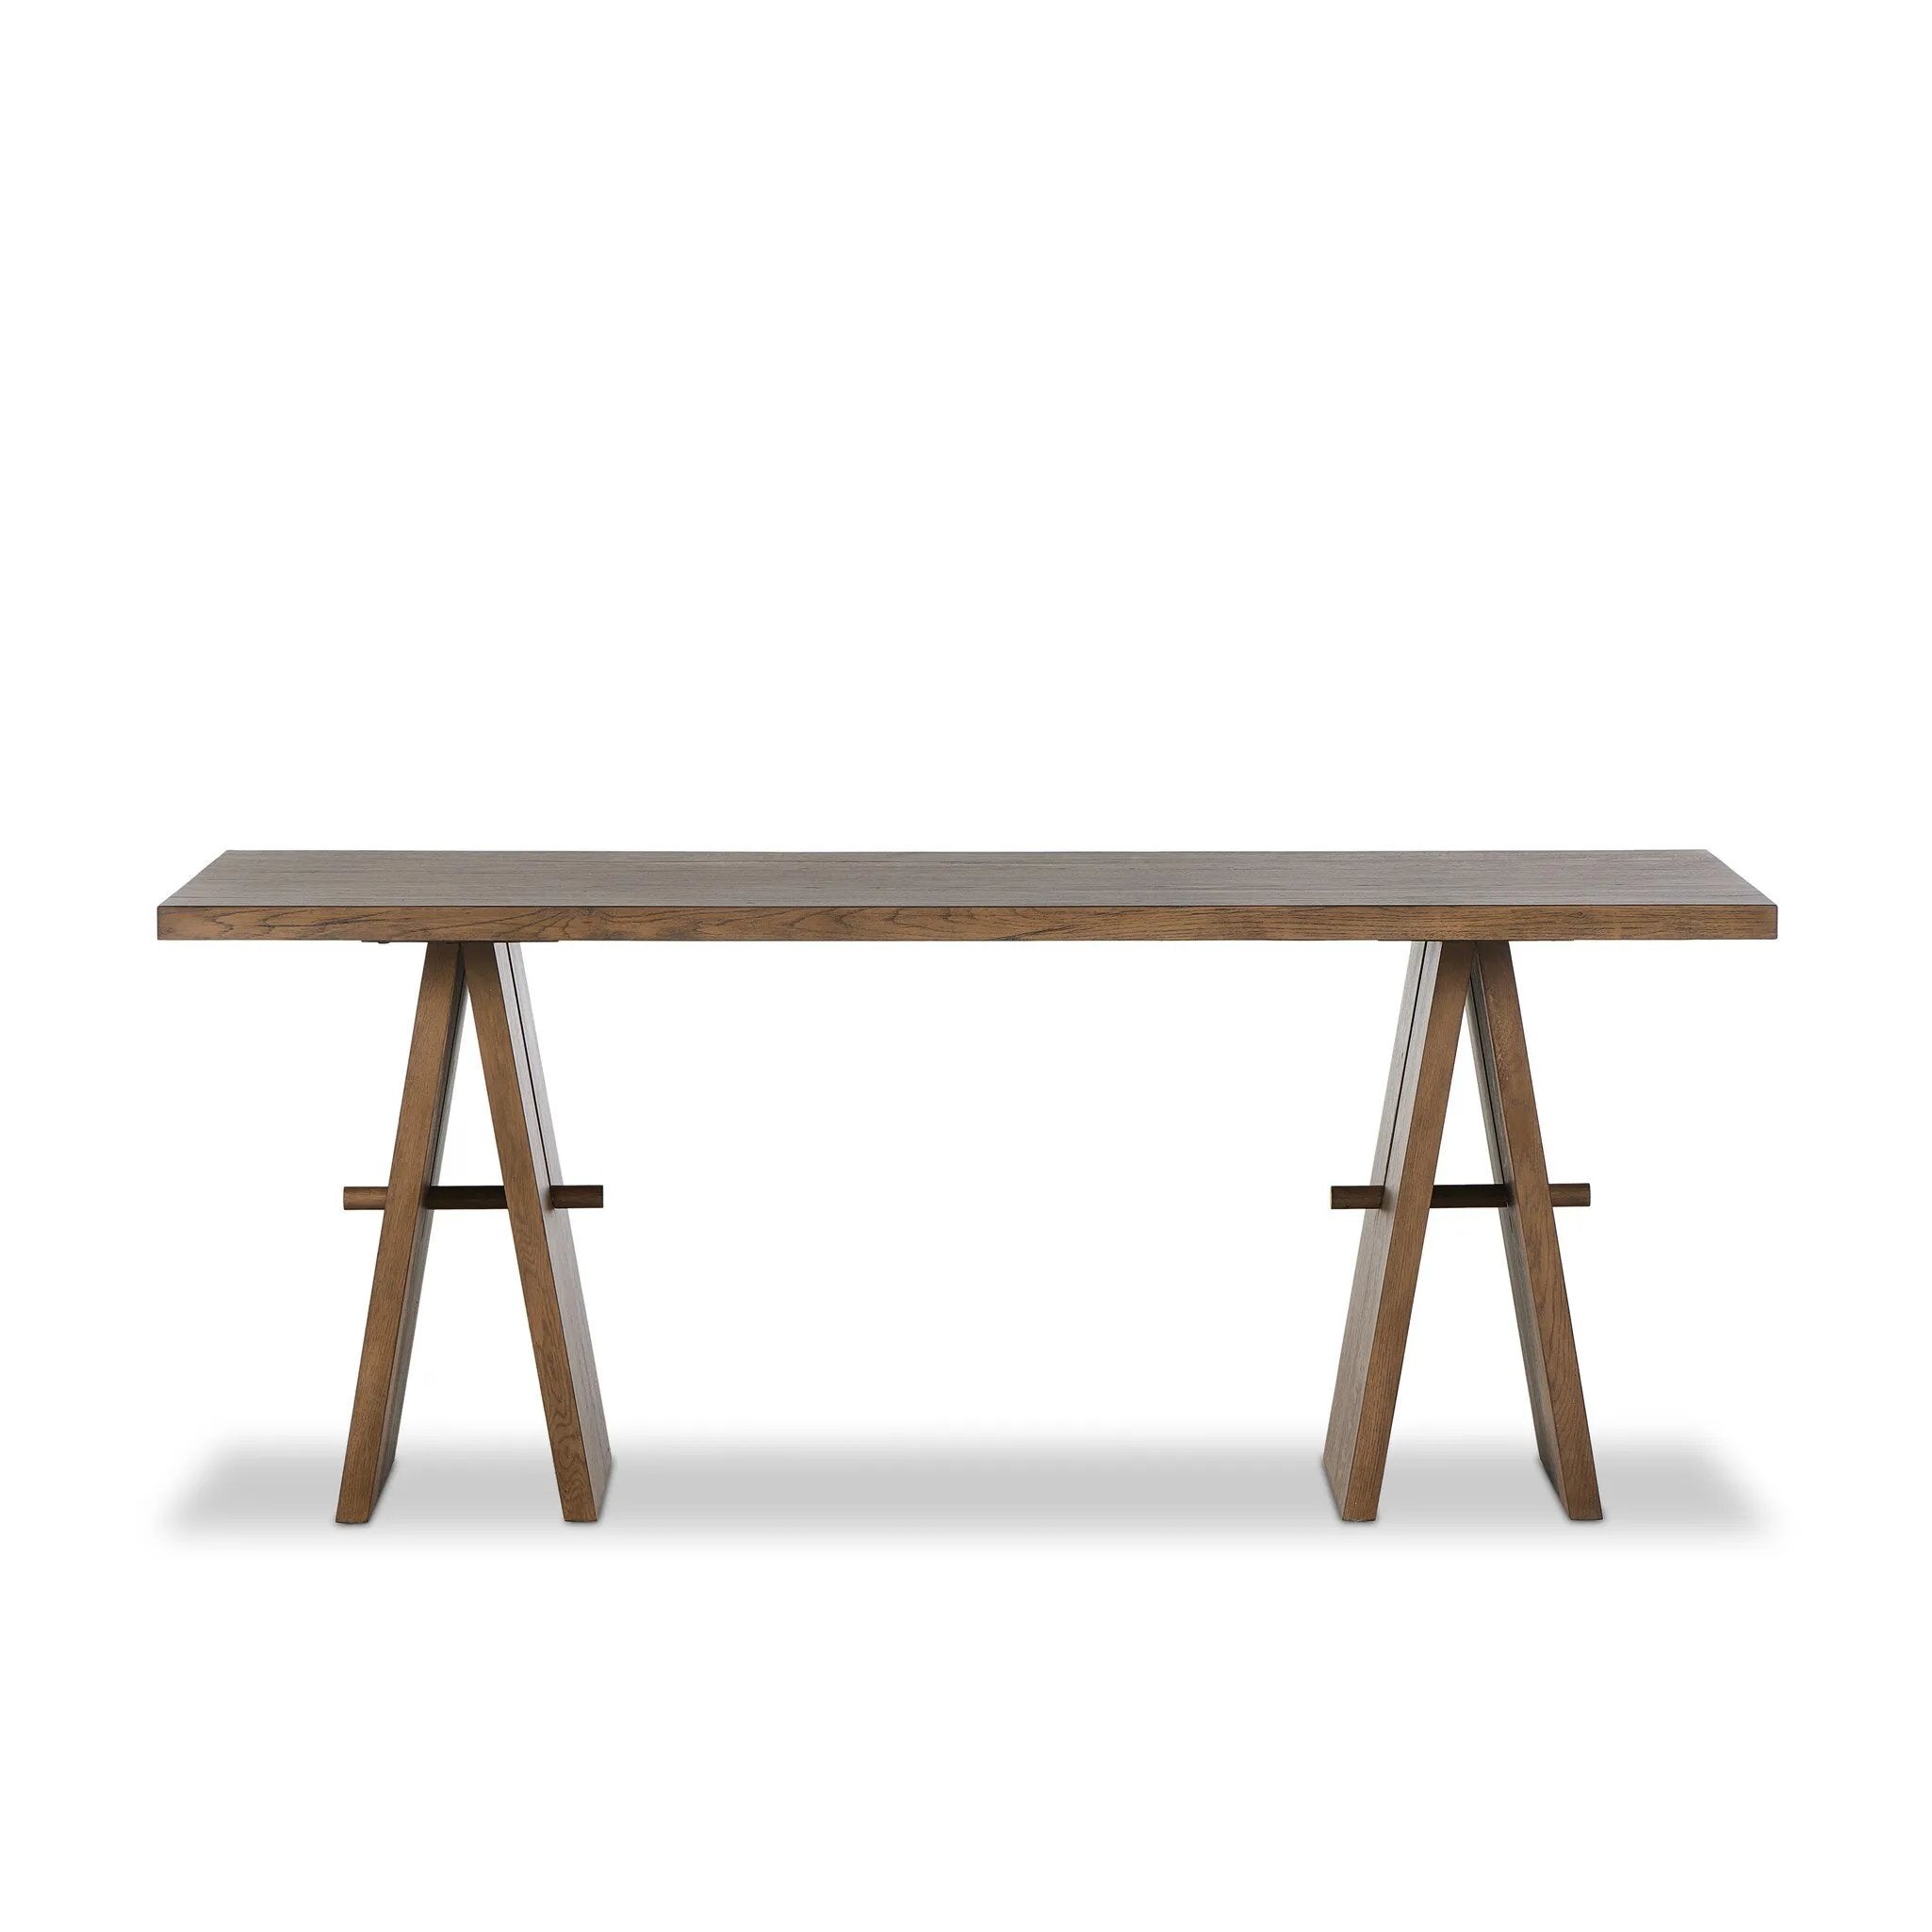 A minimalist frame on this large-scale desk lets the natural character of cracked oak take center stage. Designed with A-frame legs with exposed wood dowel joinery.Collection: Haide Amethyst Home provides interior design, new home construction design consulting, vintage area rugs, and lighting in the Portland metro area.